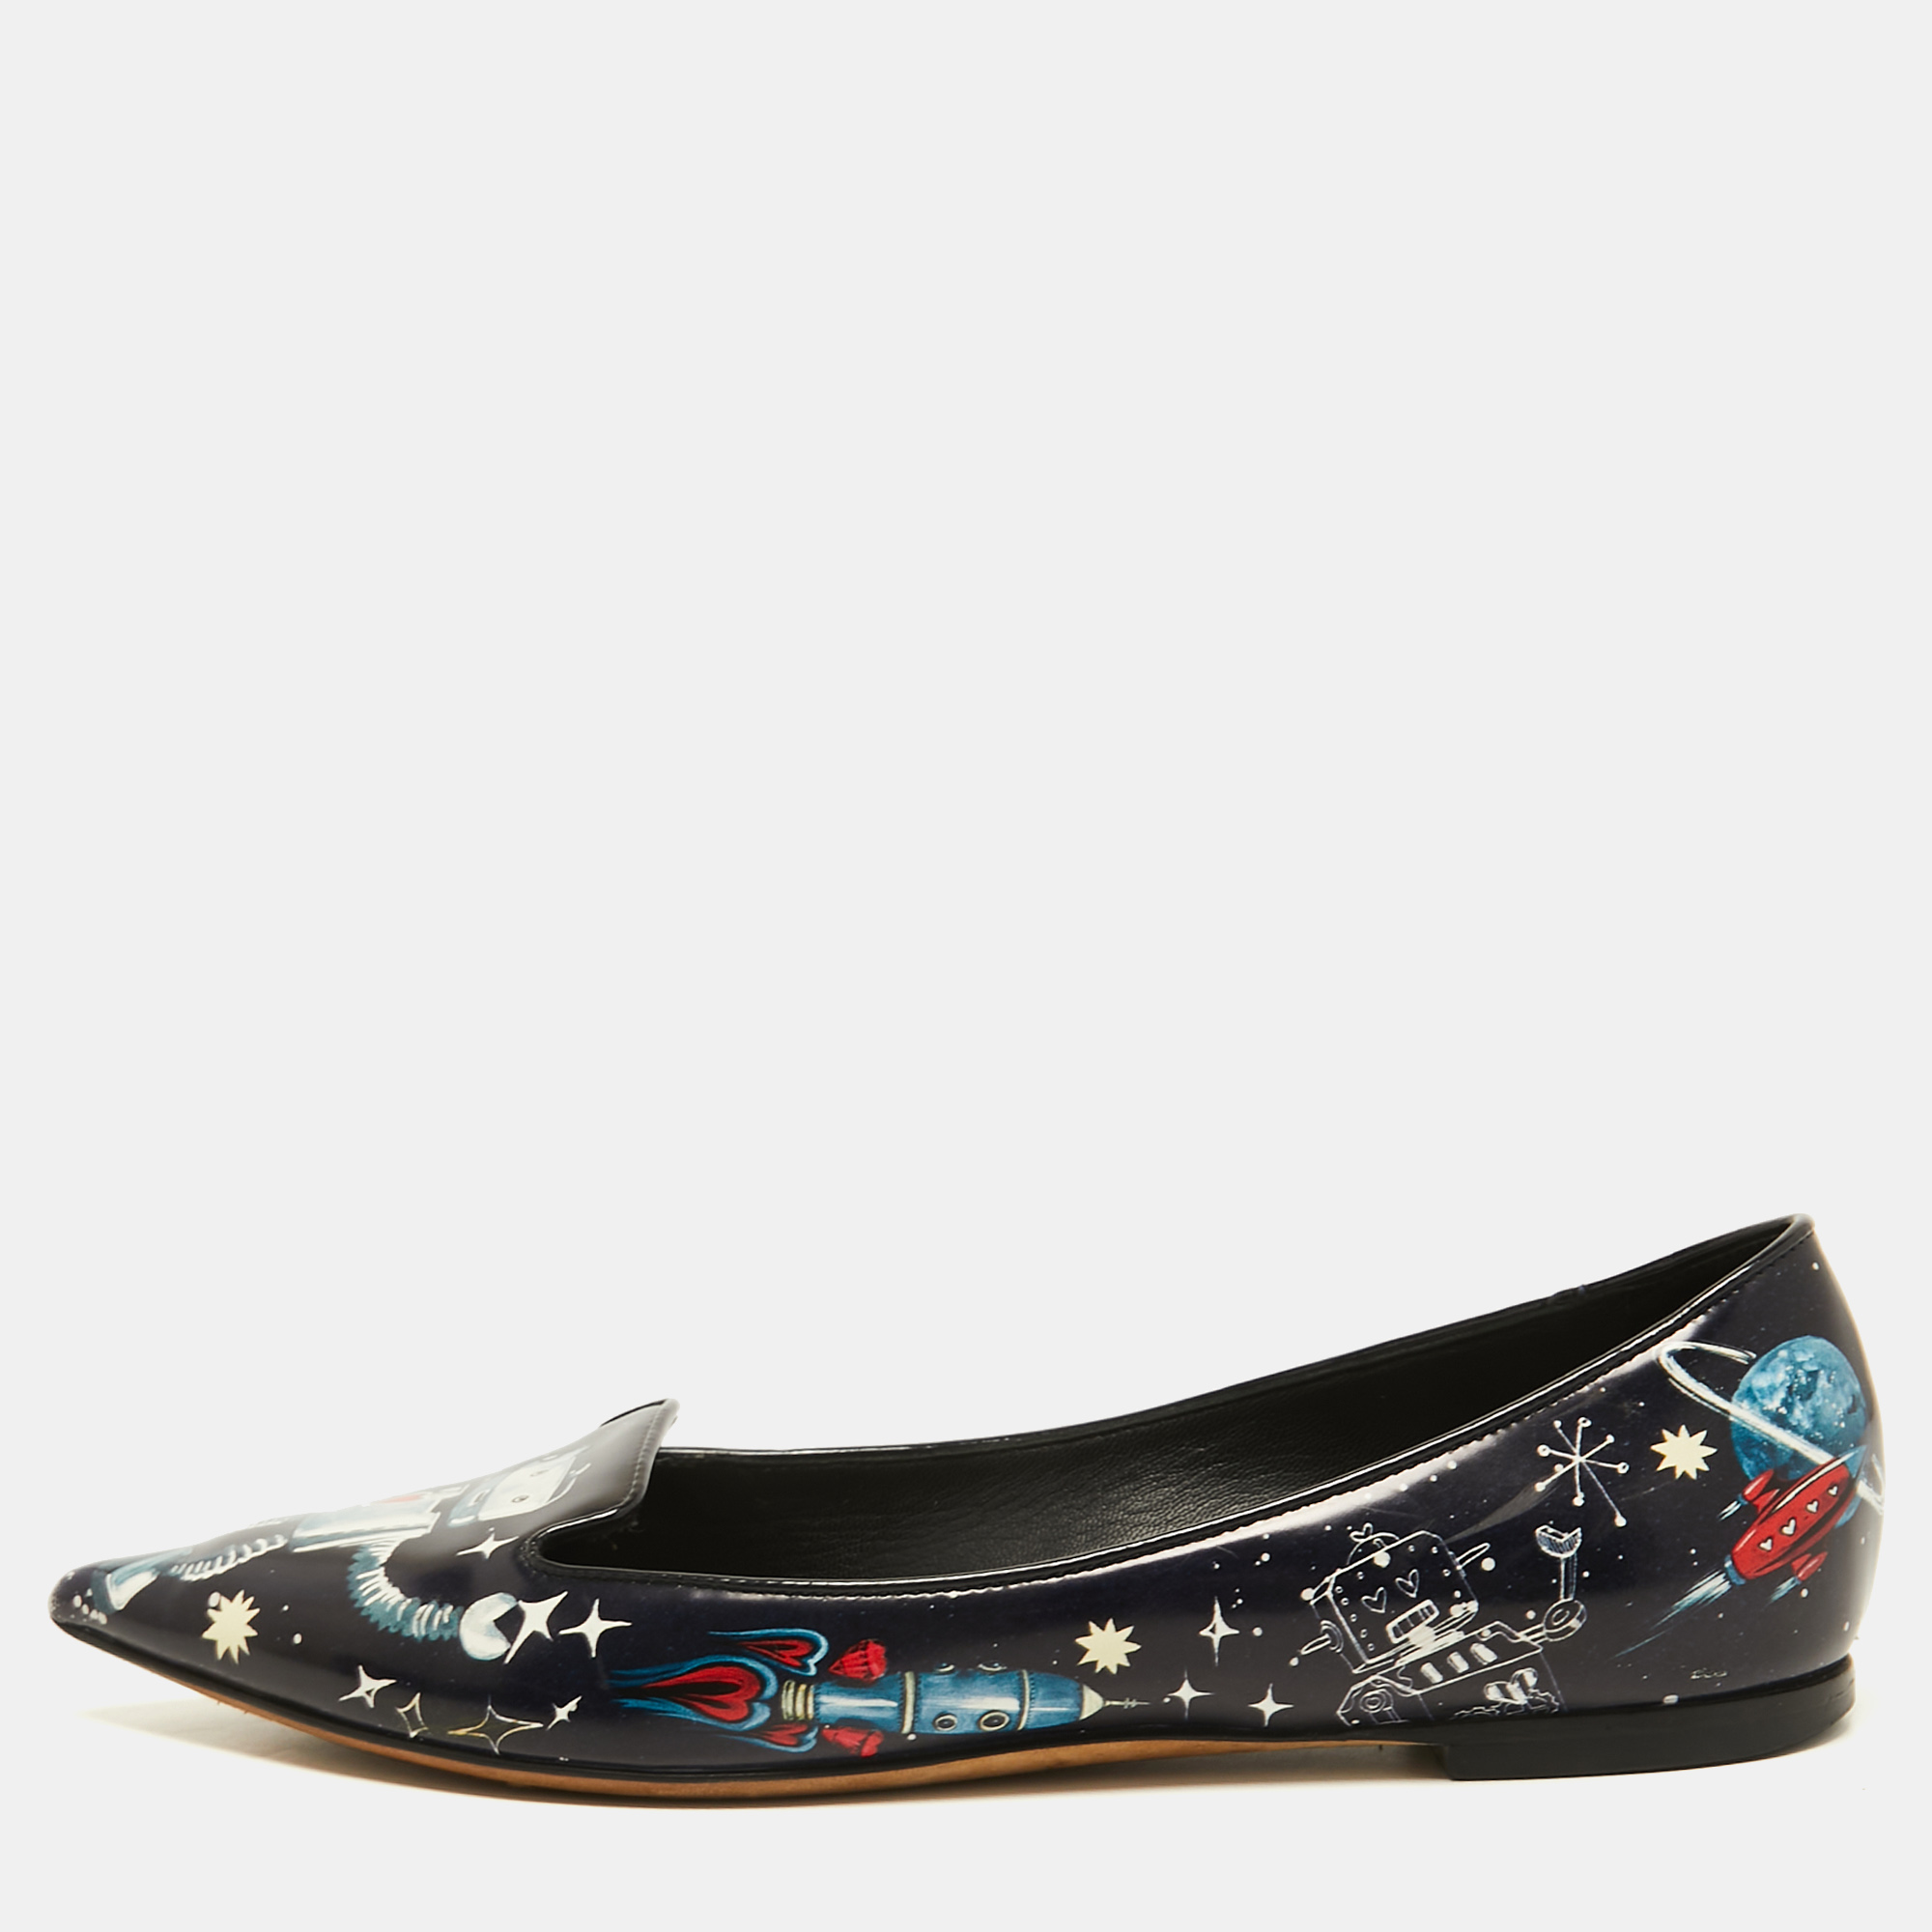 Pre-owned Dolce & Gabbana Navy Blue Patent Leather Galaxy Print Ballet Flats Size 35.5